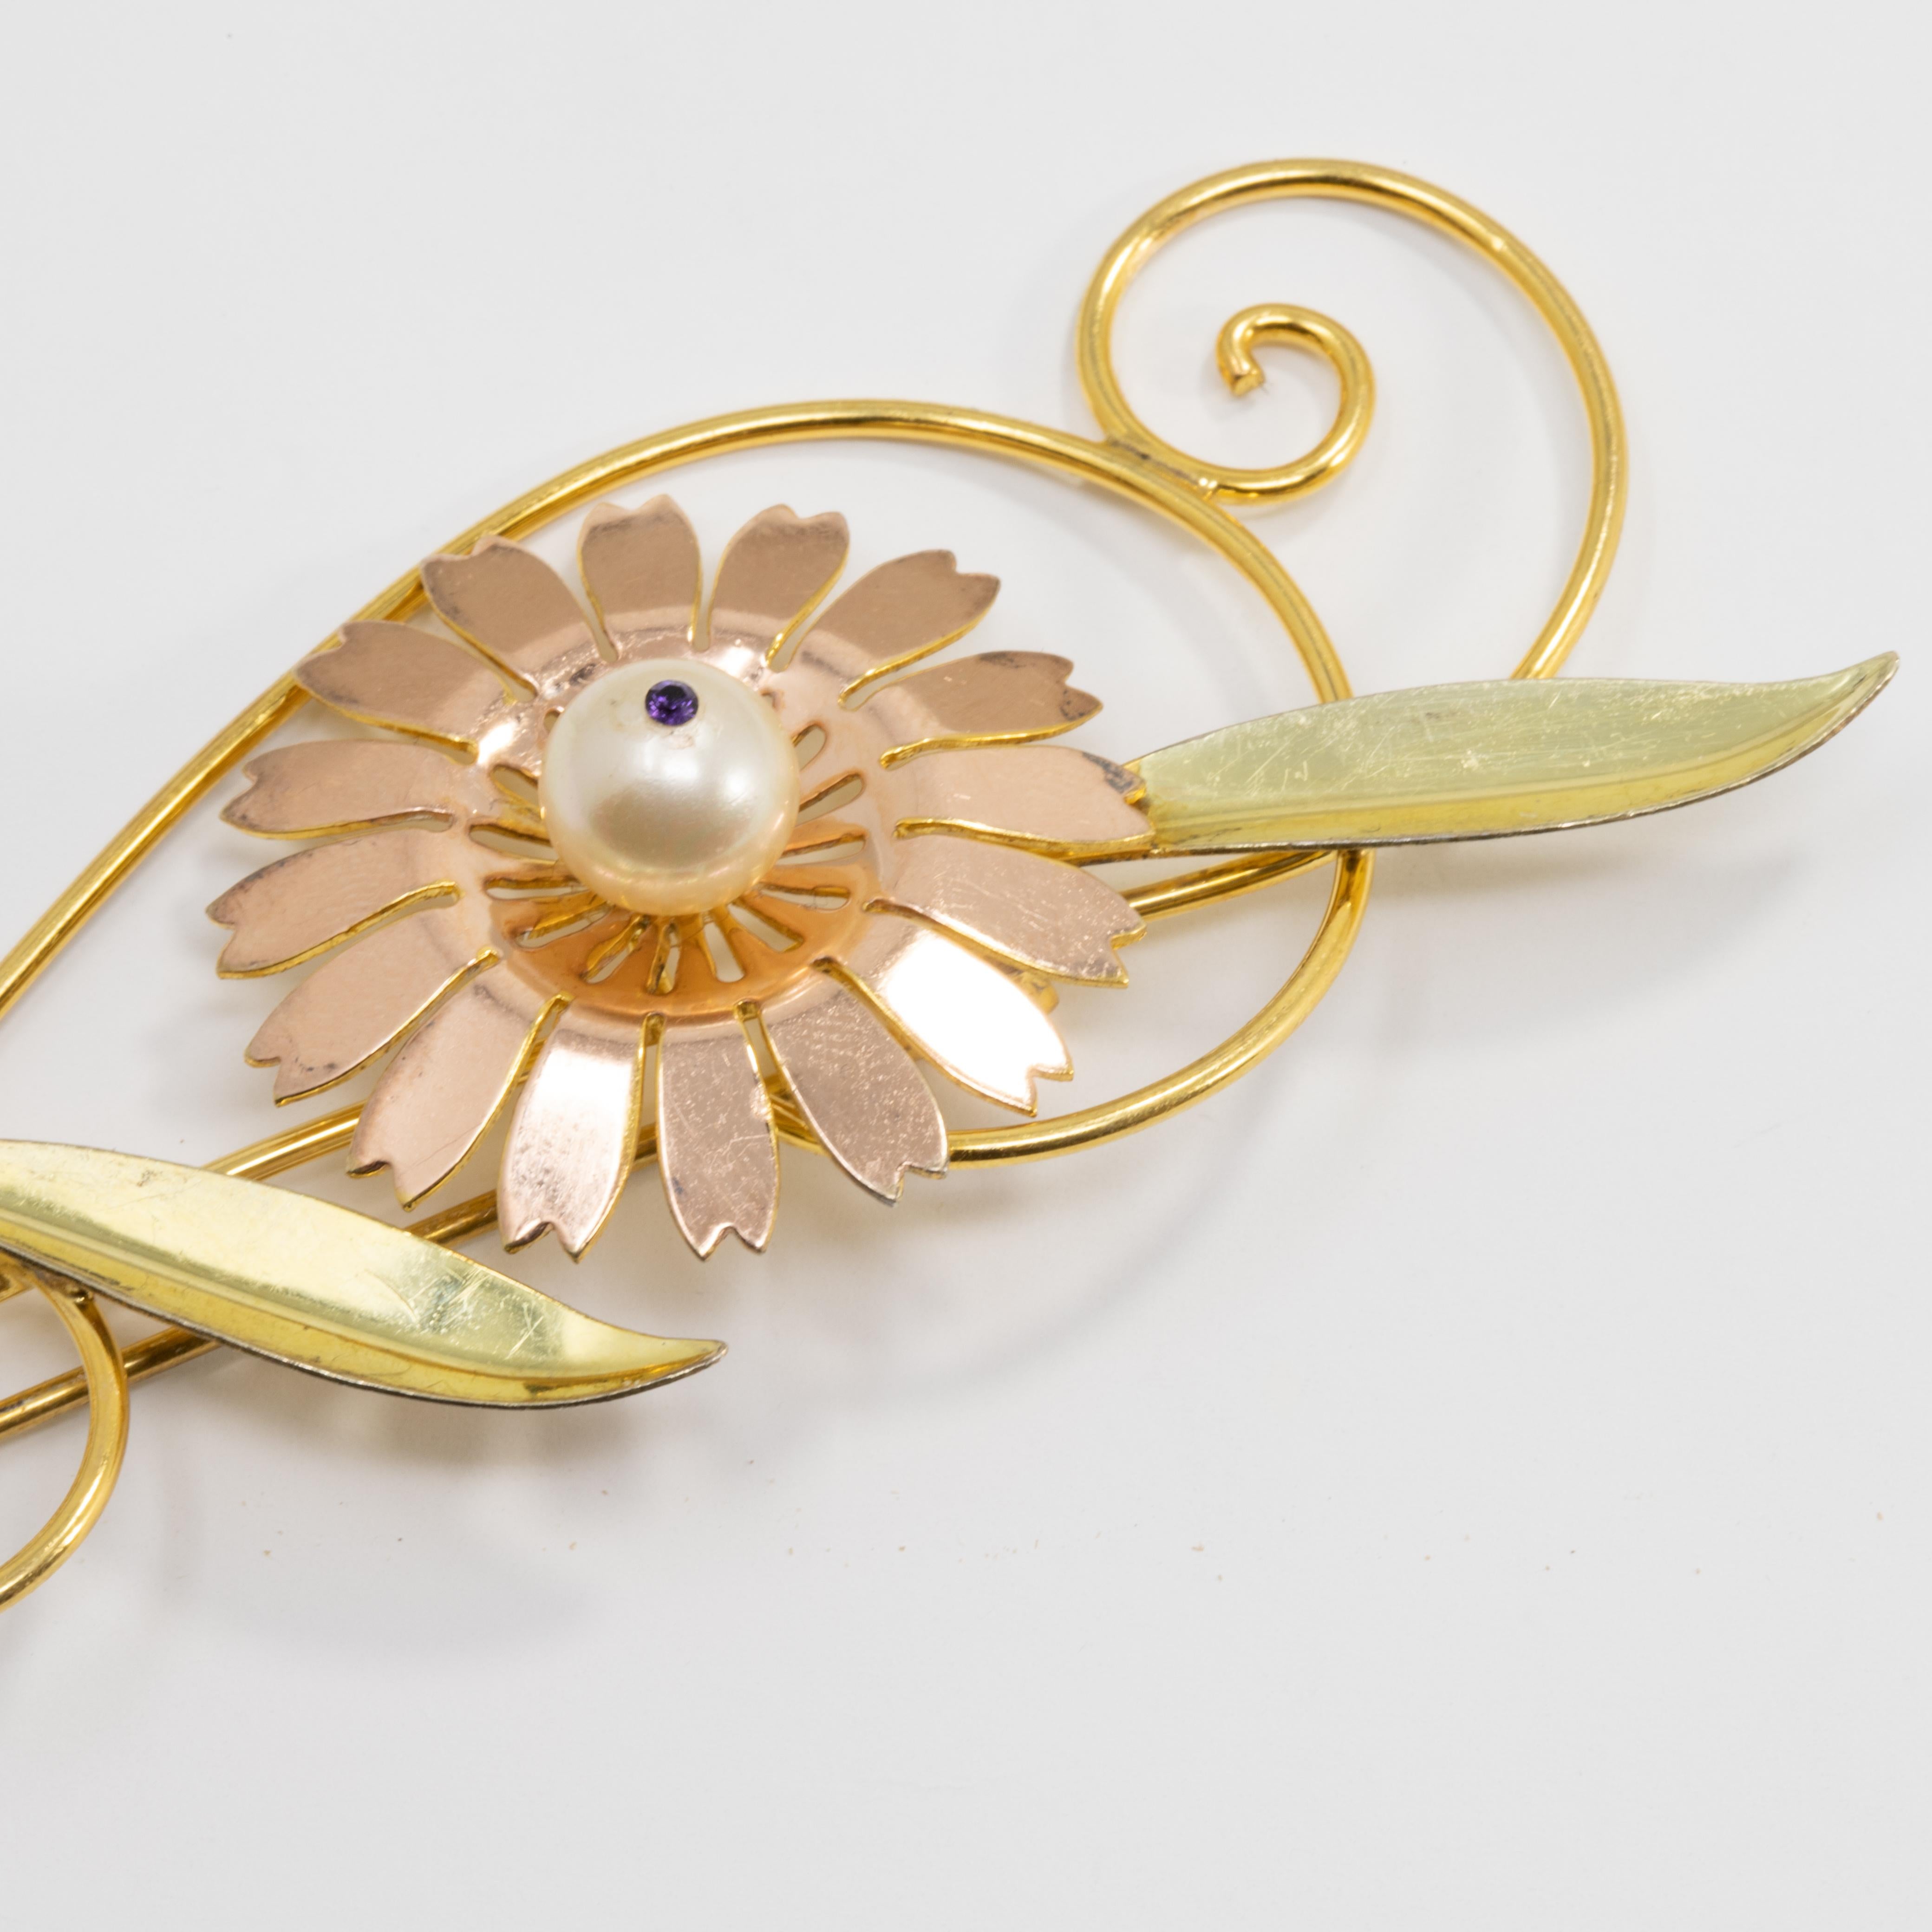 An elegant flower pin from Van Dell. Features a single flower with winding wire stems and leaves, accented with a single faux pearl. A bright and bold, yet sophisticated, brooch! 12K gold filled sterling silver.

Hallmarks: Van Dell, 1/20-12K-G.F.,